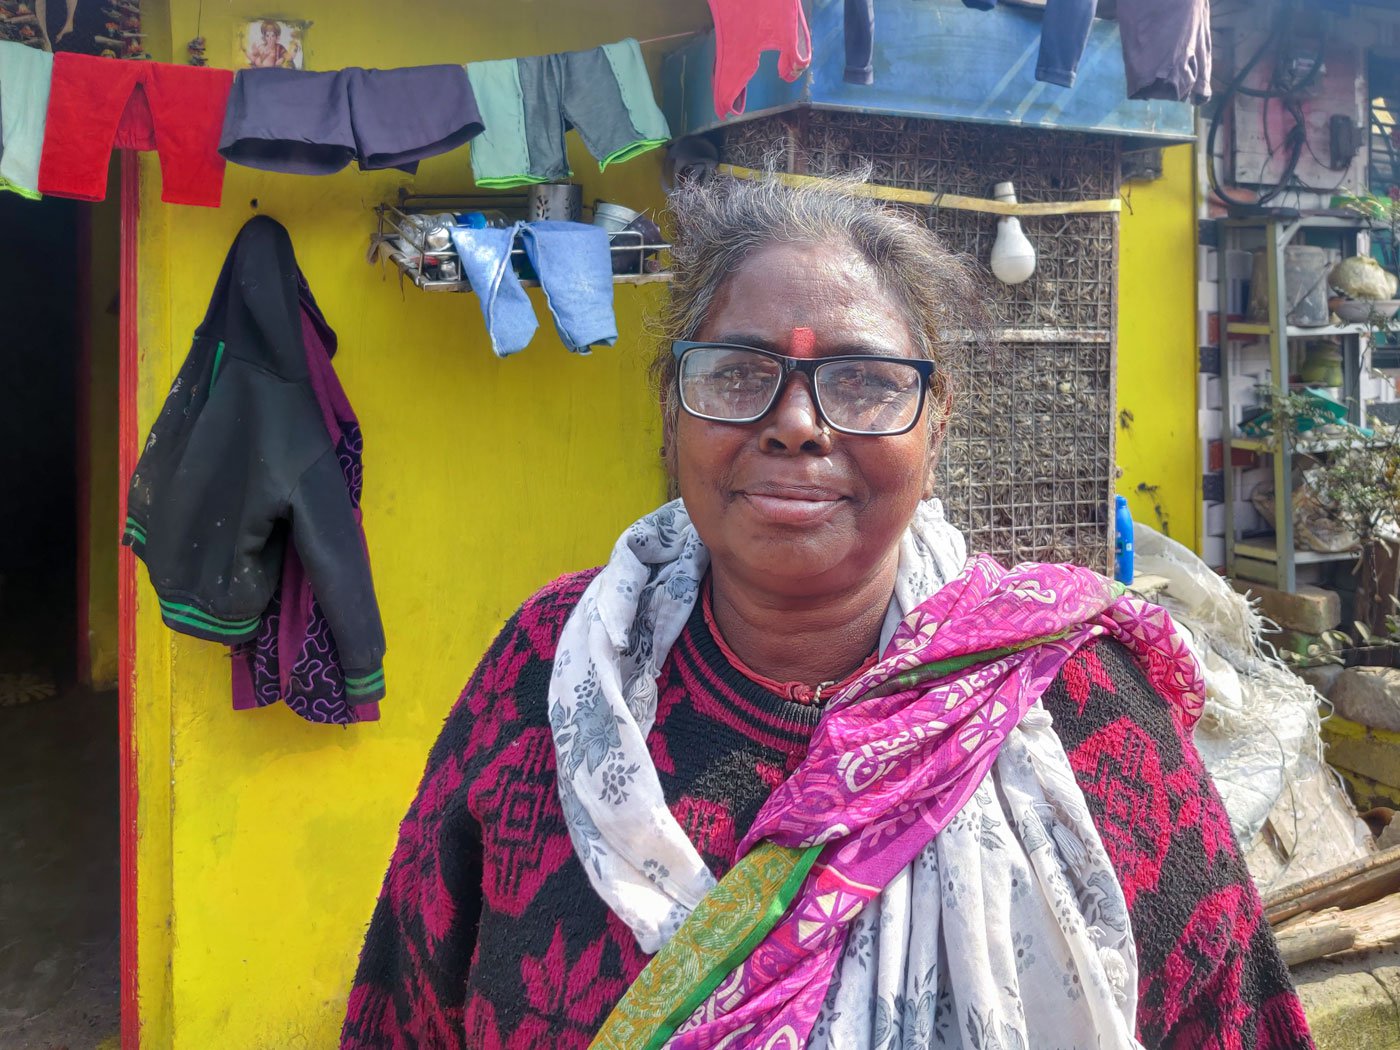 Parvati Kakade, 55, got an LPG connection under the government scheme. "I stretch it out for six months or so by using it only when we have guests over or when it is raining heavily,' she says